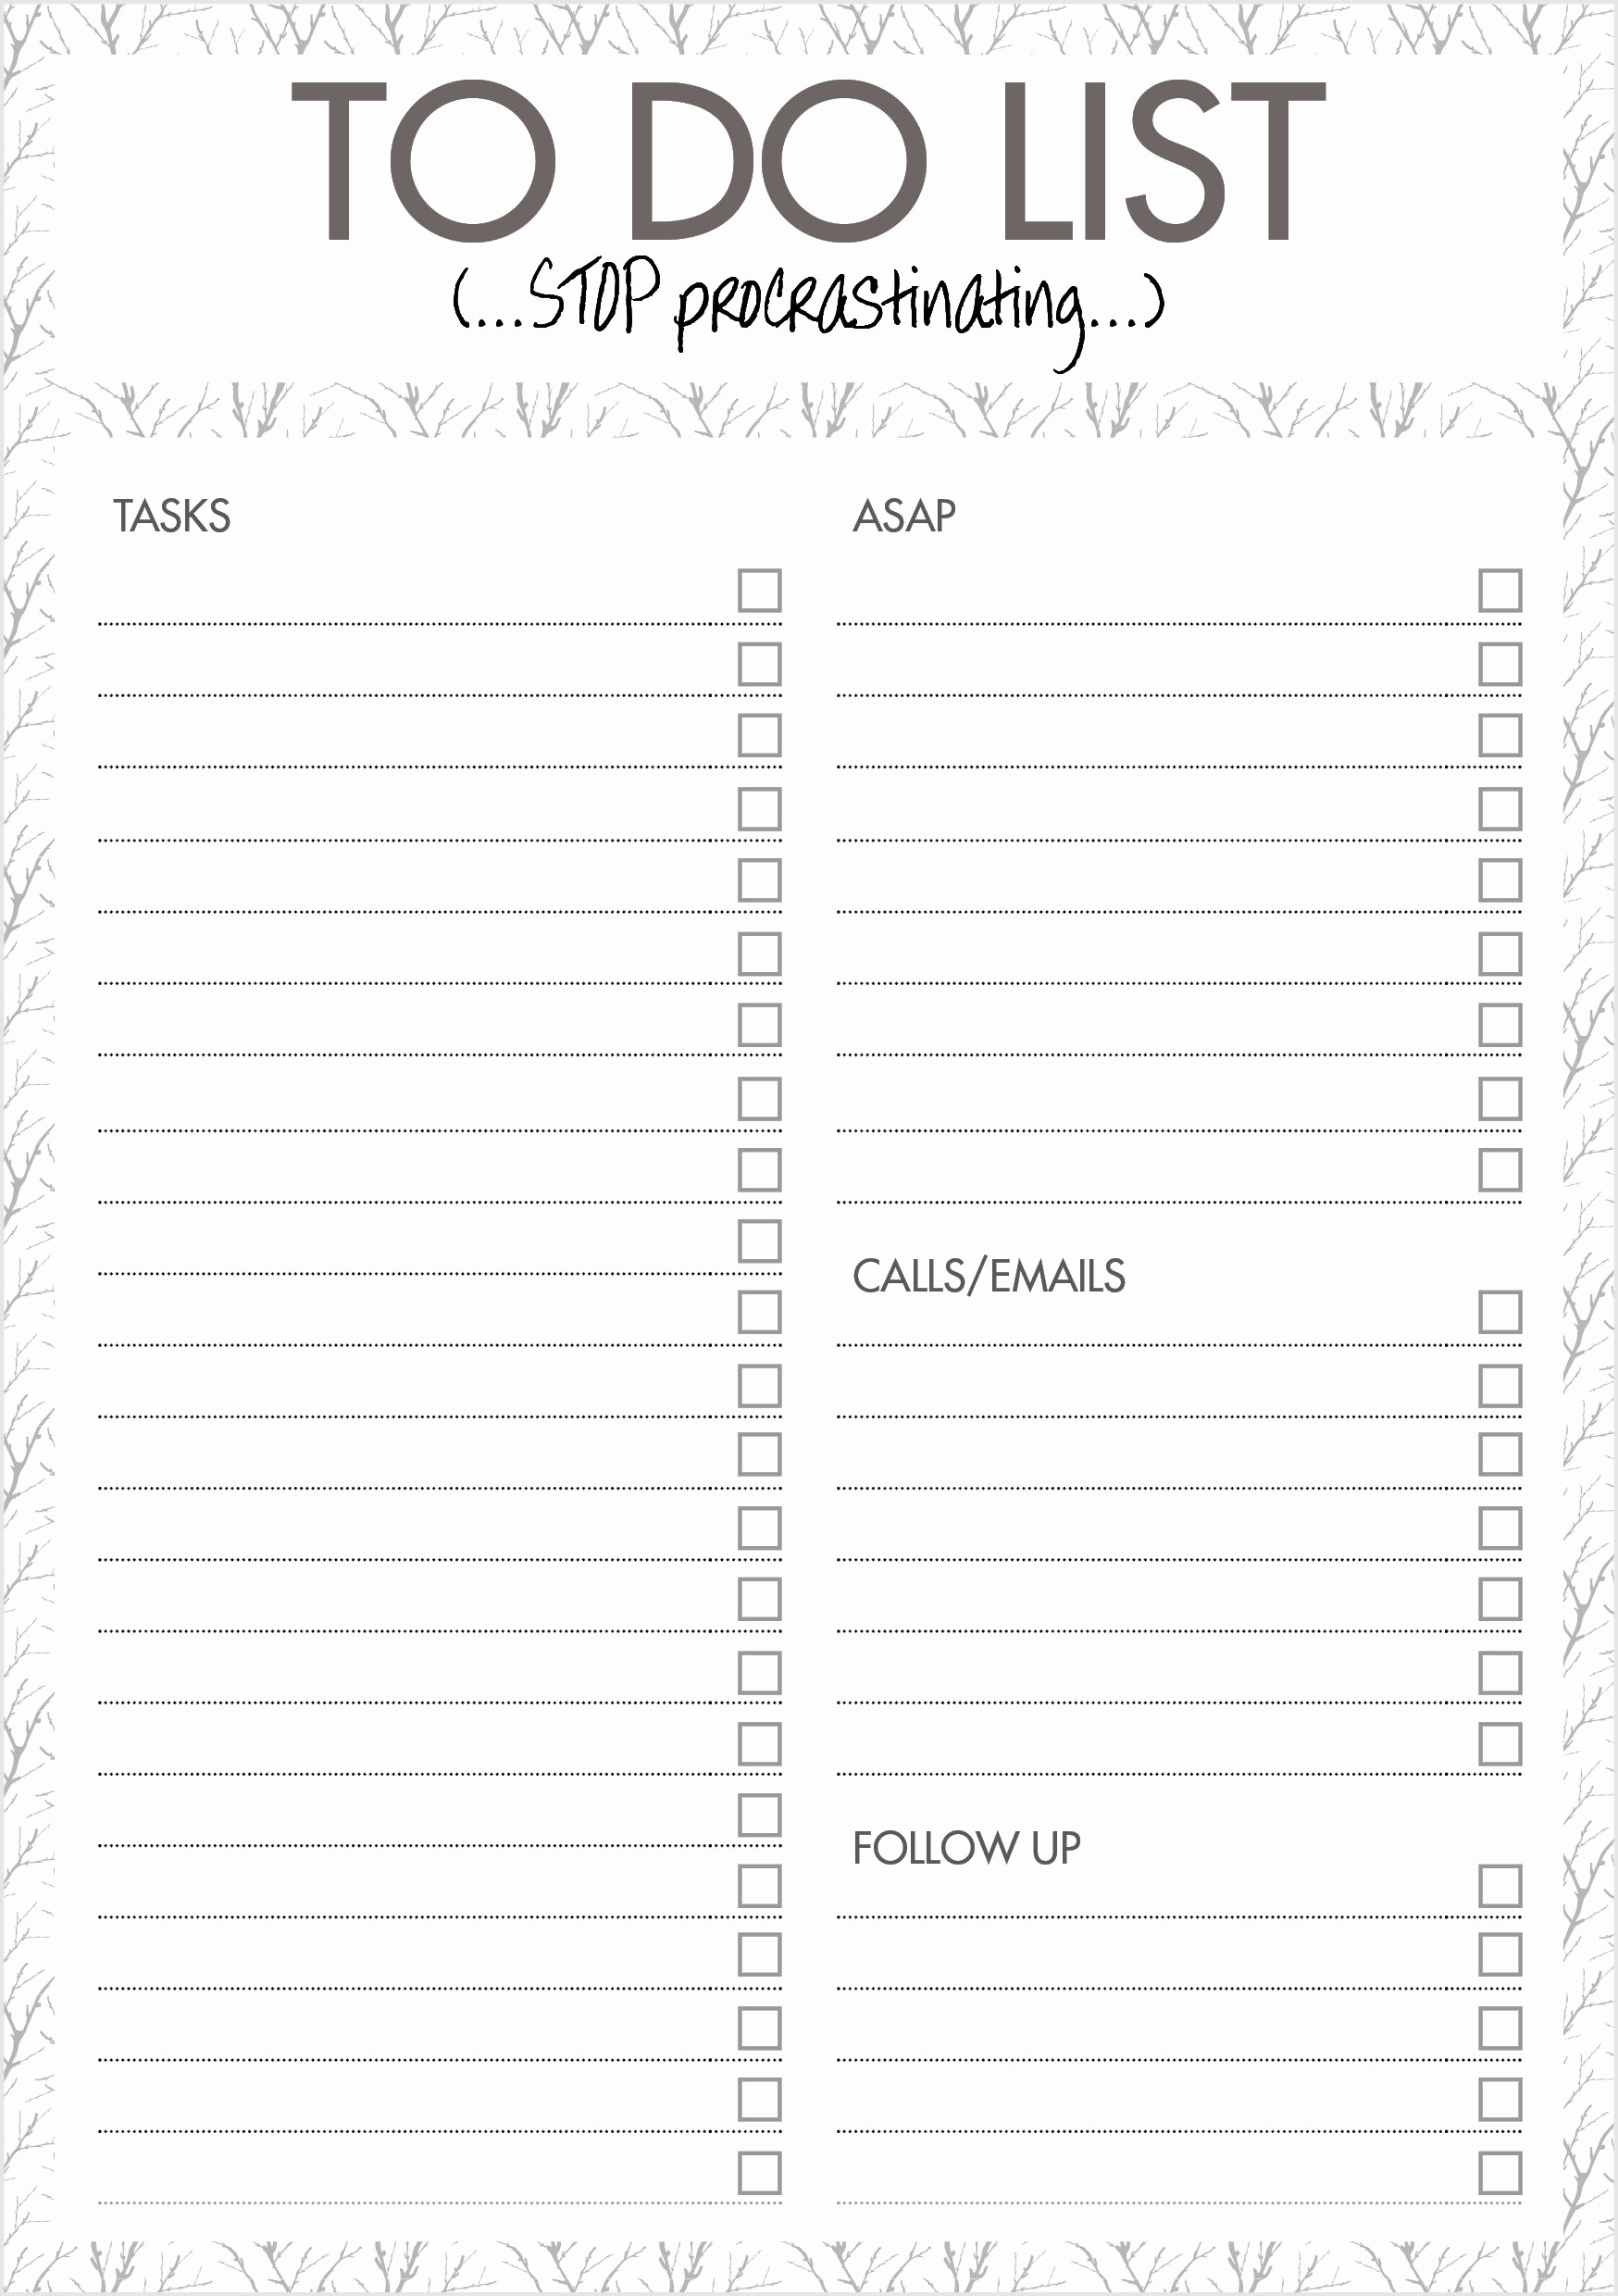 Things to Do Checklist Template Fresh organization Templates On Pinterest